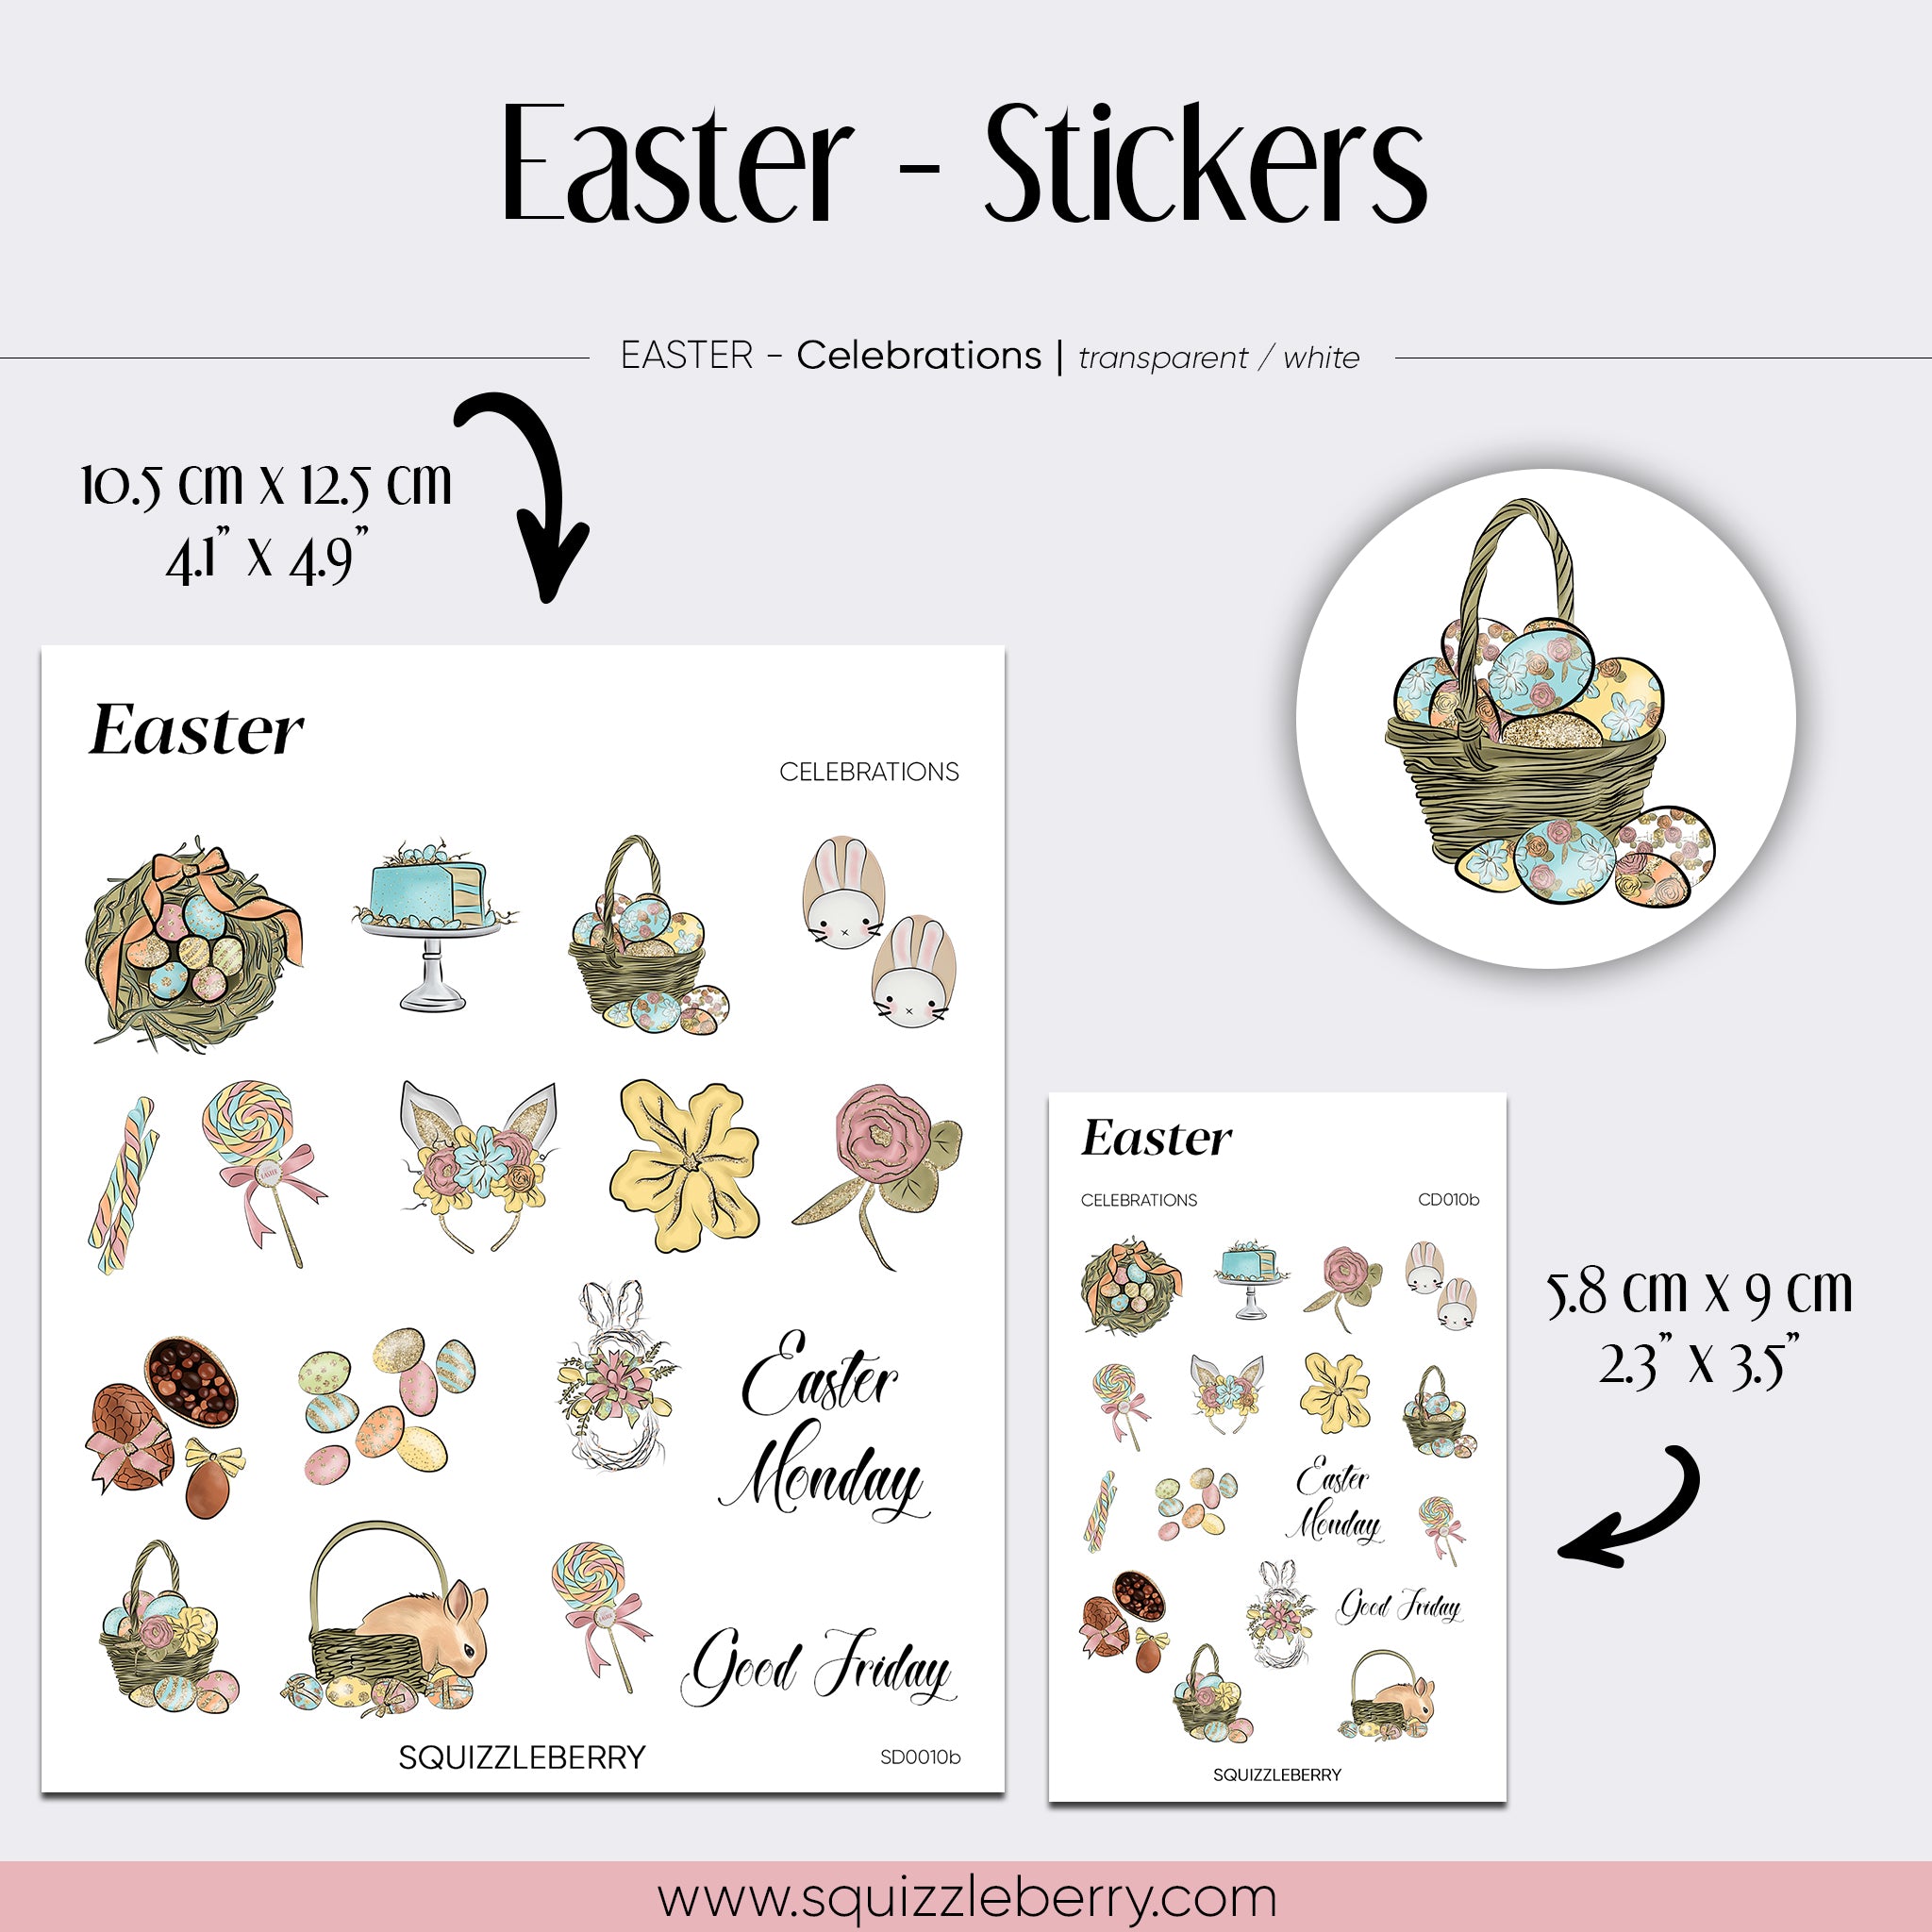 Easter - Stickers | SquizzleBerry